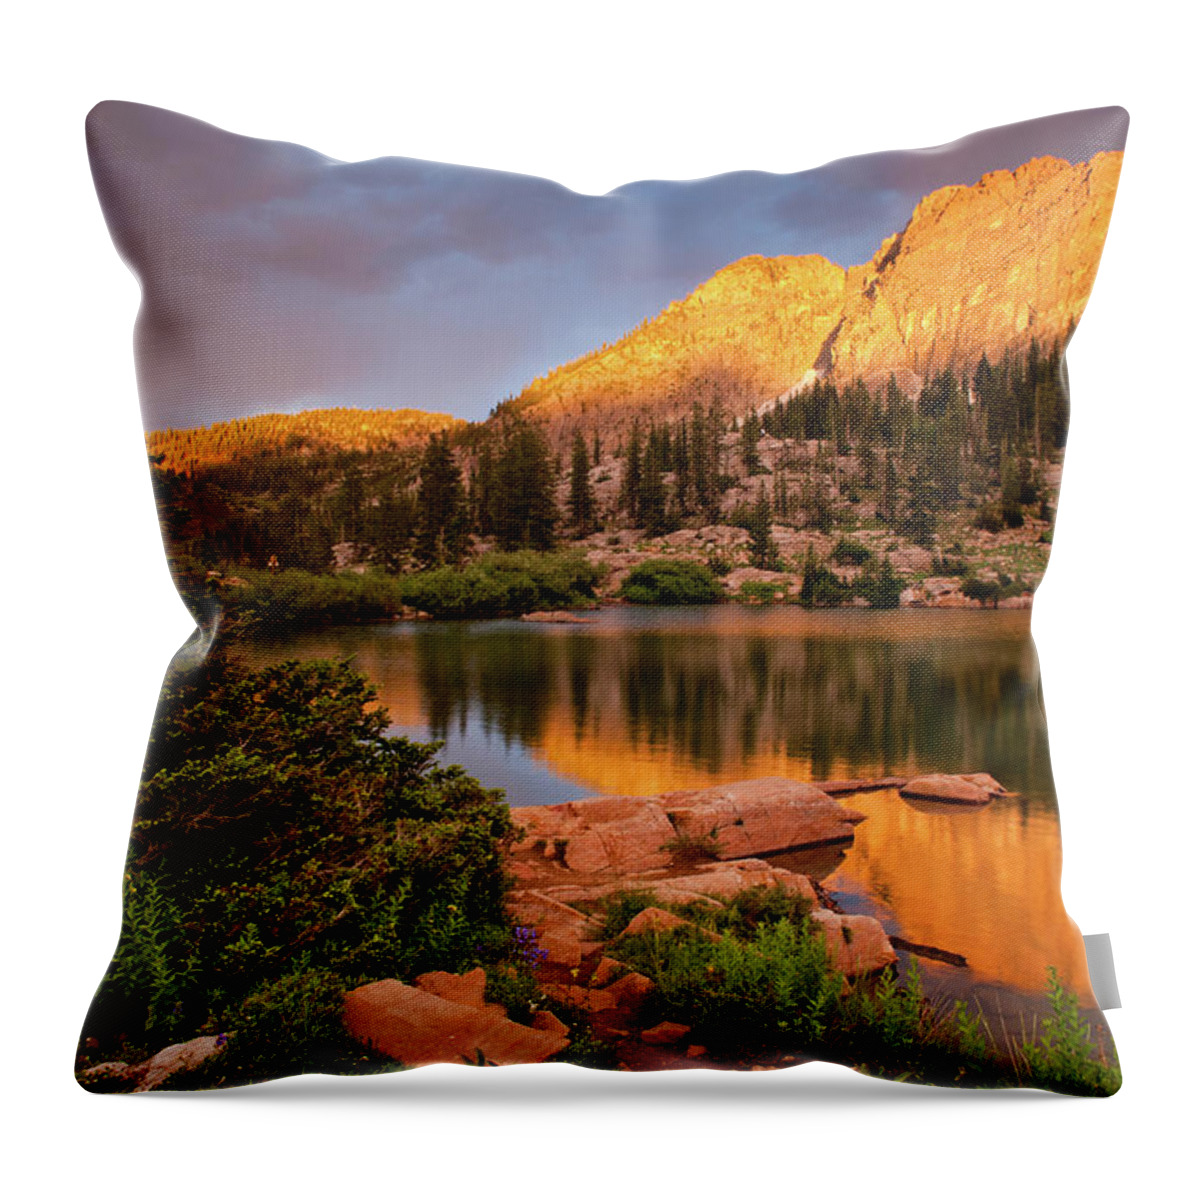 Scenics Throw Pillow featuring the photograph Cecret Lake by Photo By Sam Scholes